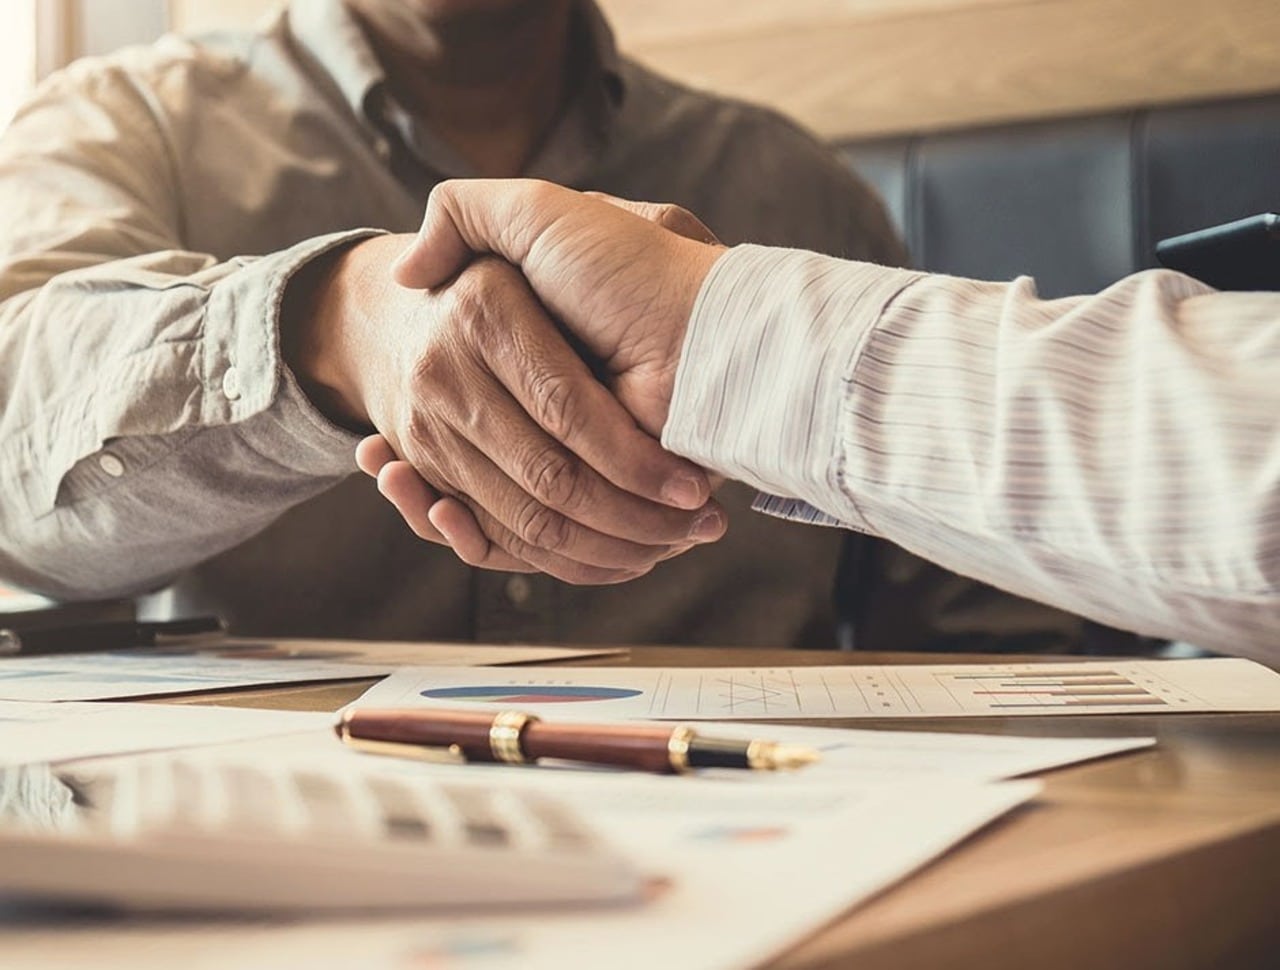 property finance broker shaking hands in a deal with property developer